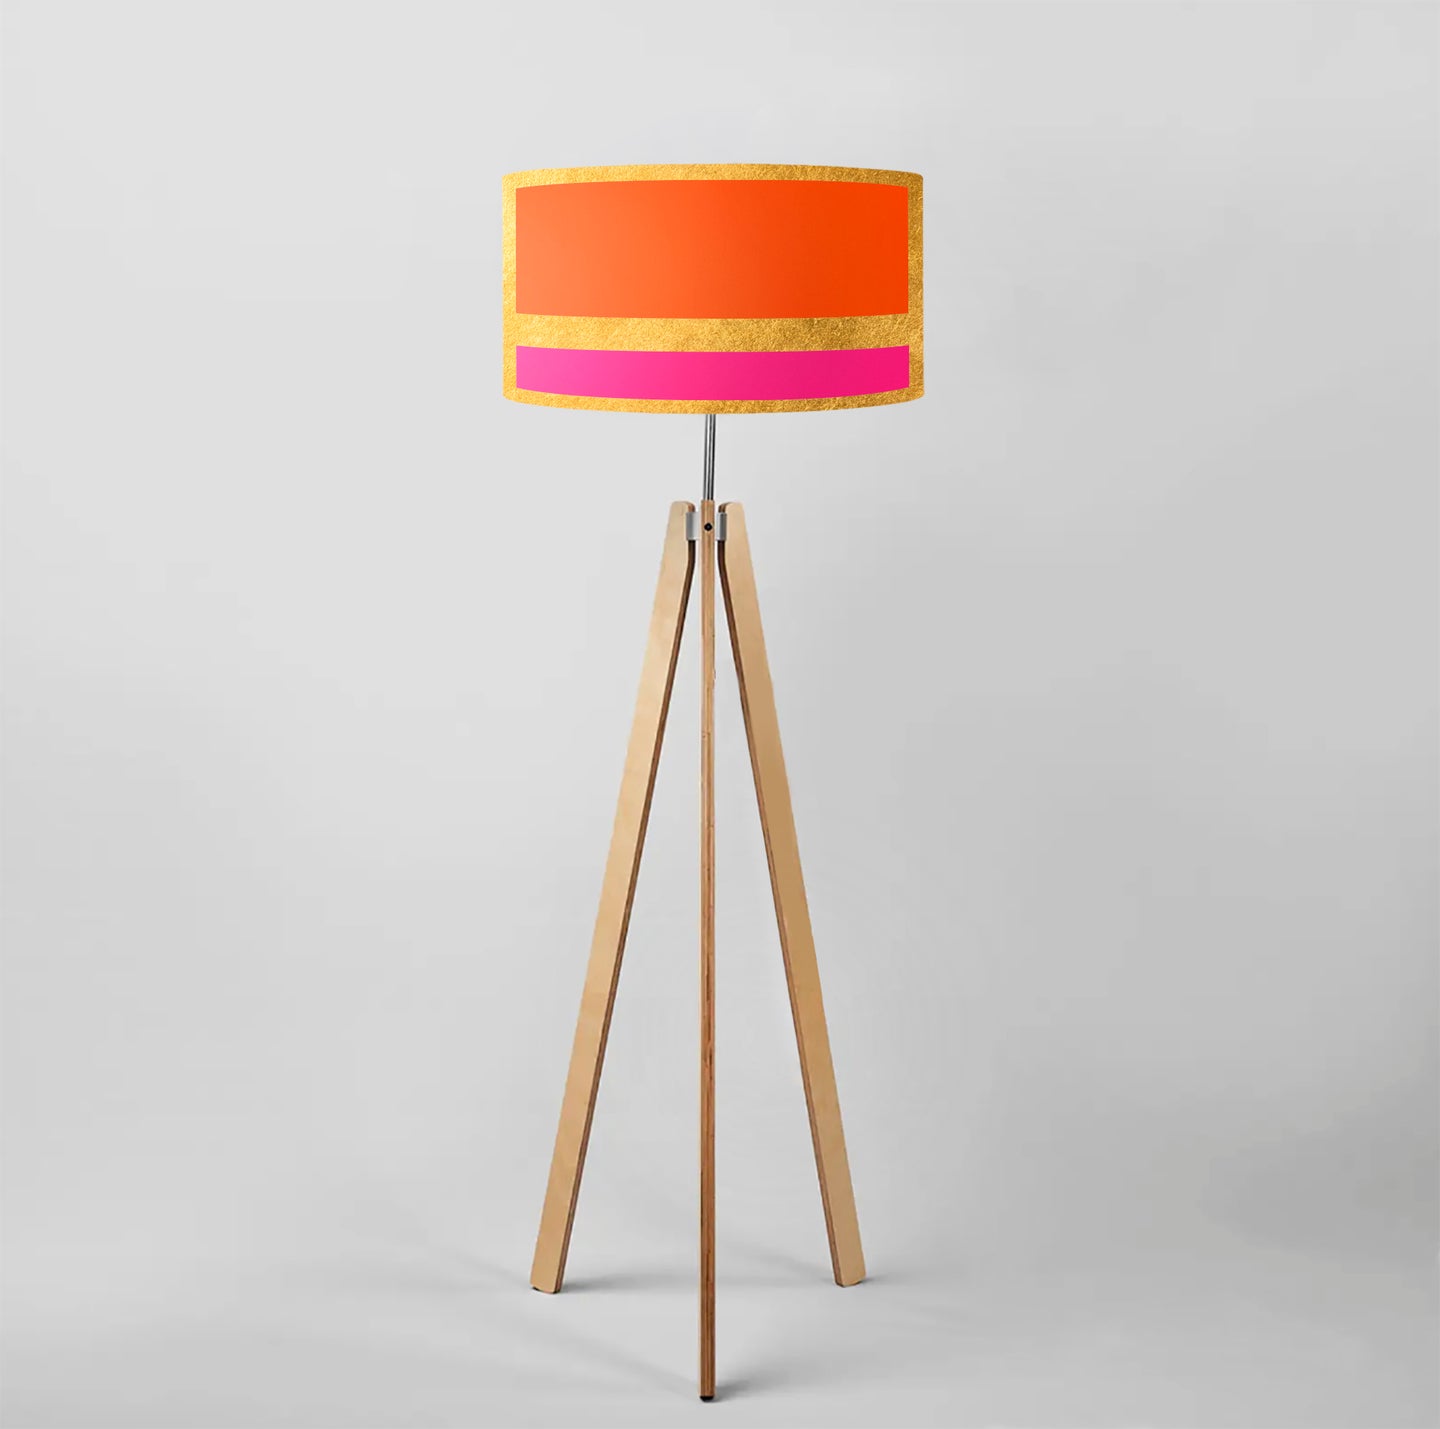 Orange and Pink Stripes on Gold drum lampshade, Gold Lining, Diameter 40cm (16